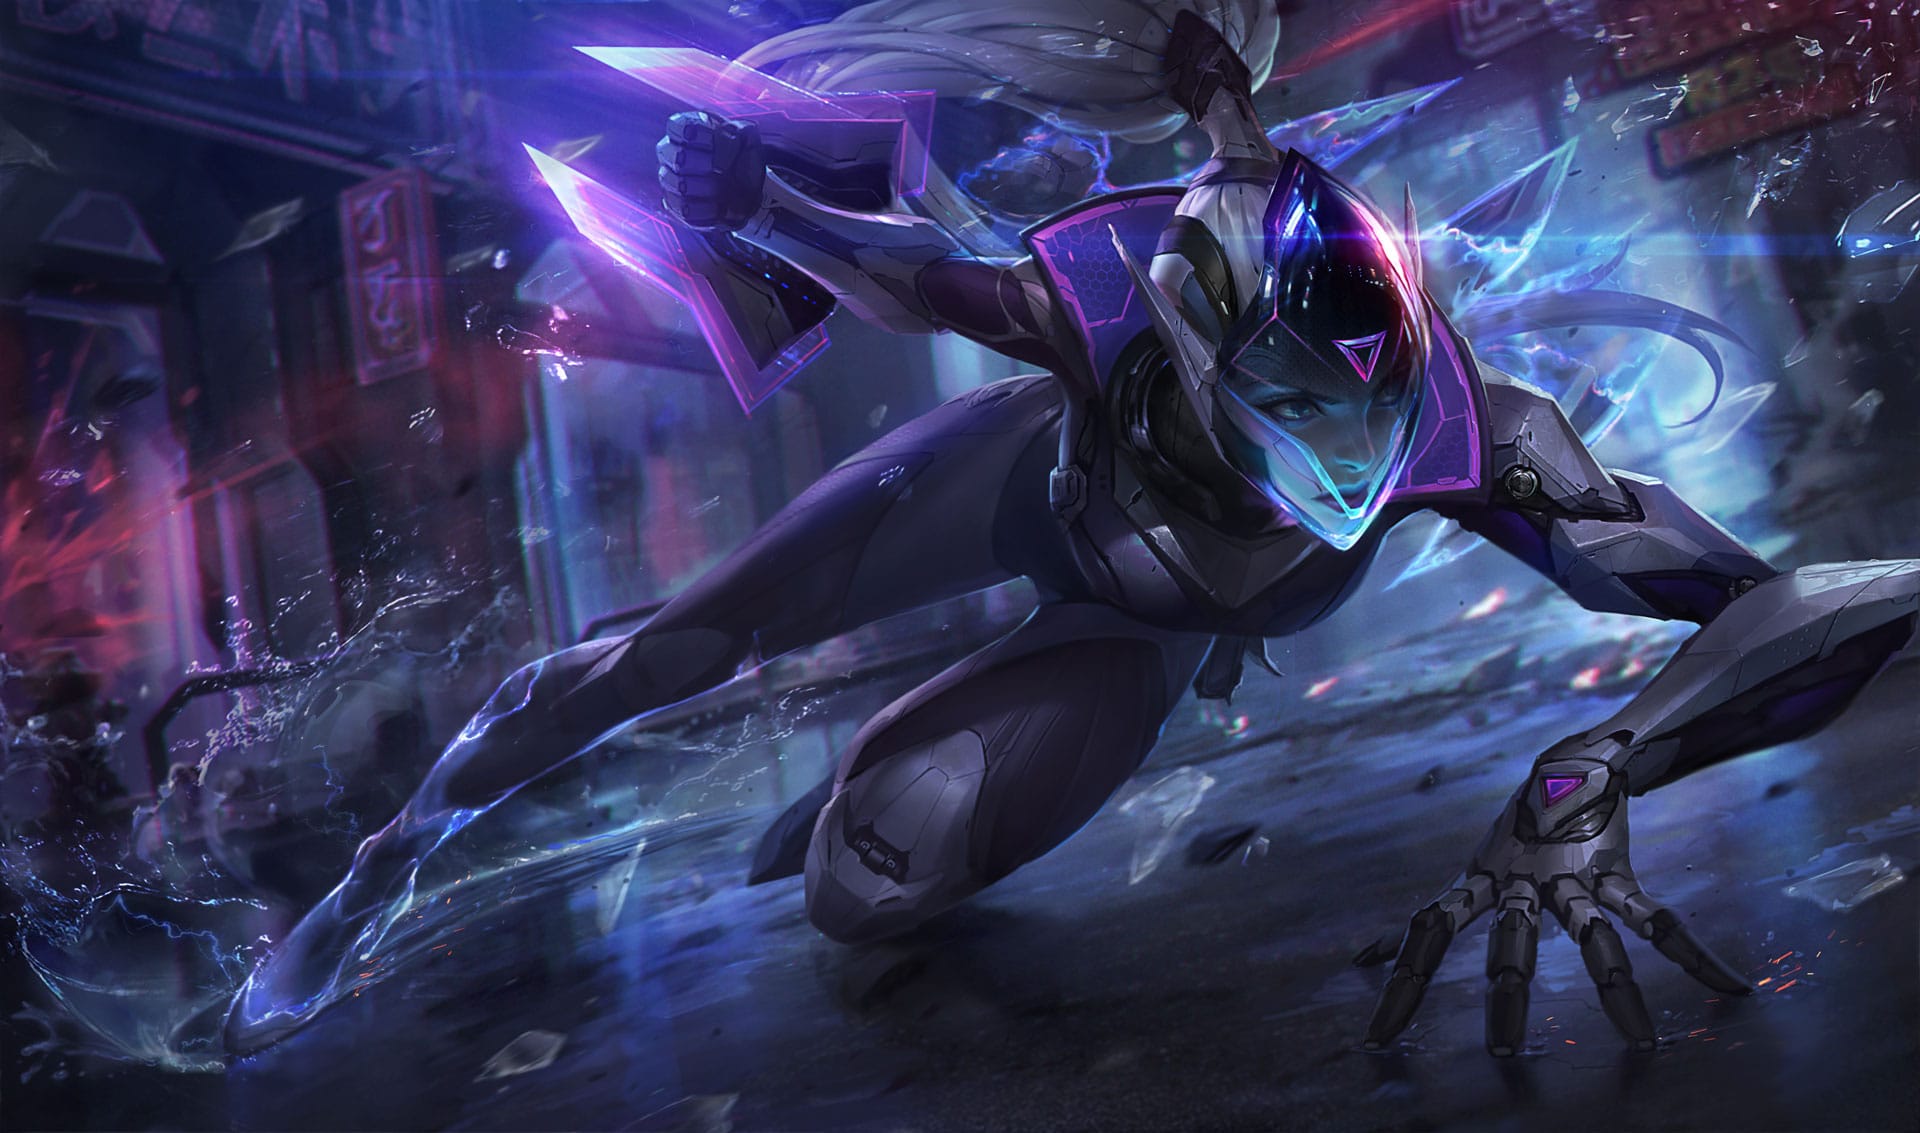 PROJECT: Vayne by Chengwei Pan